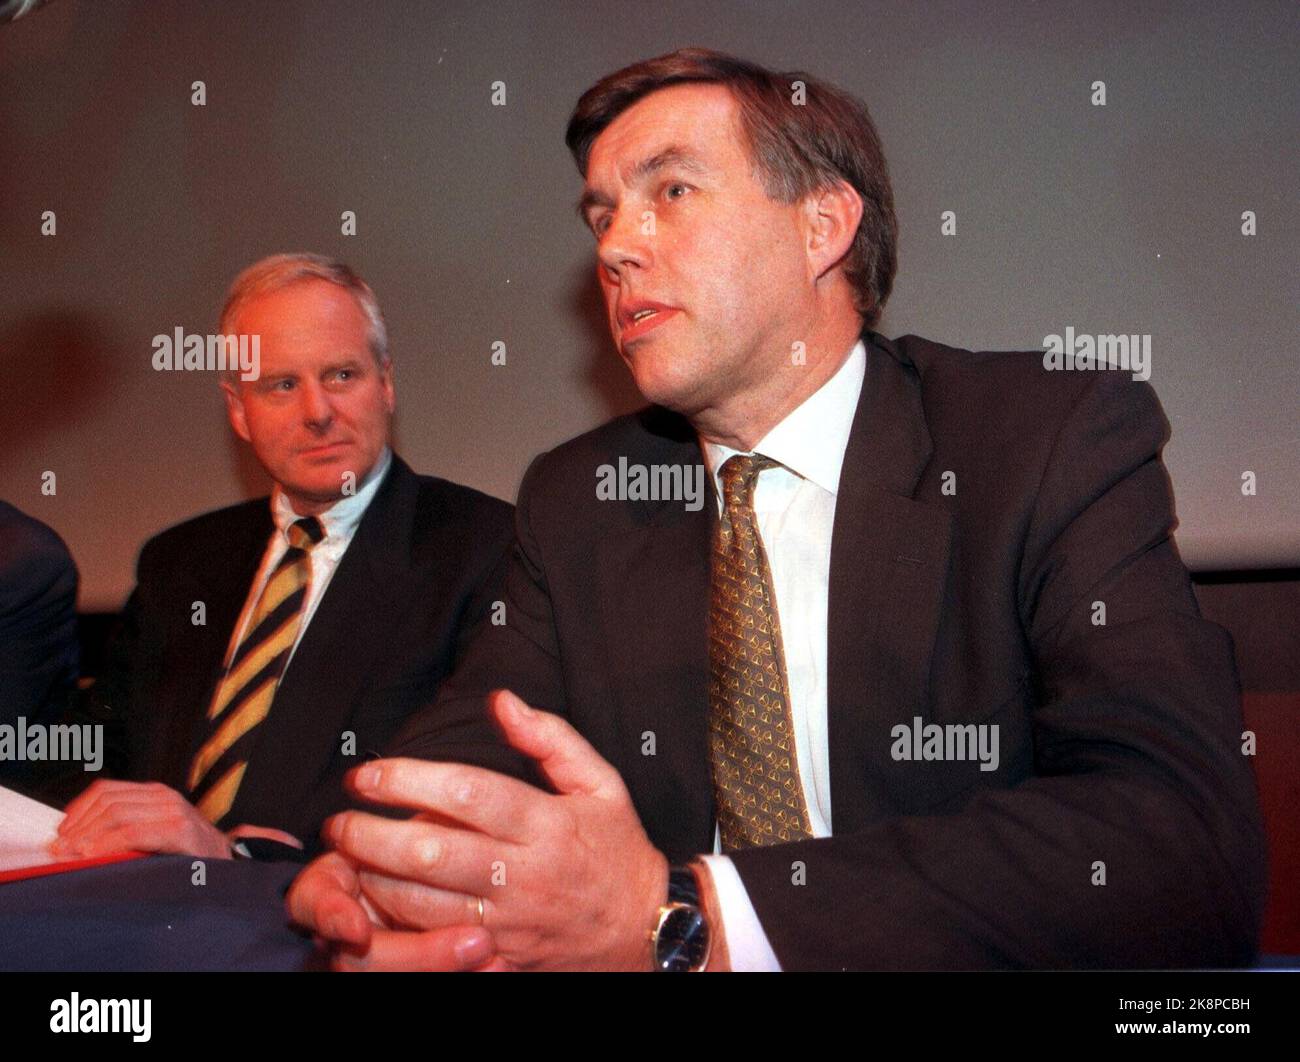 Oslo 19970626. Plans for a merger between the bank Kreditkassen and the insurance company Storebrand. CEO Åge Korsvold (t.h.) in Storebrand and Kreditkassen's CEO Tom Ruud at the press conference after the Storebrand General Assembly. The merger with Kreditkassen was voted down by the General Assembly in Storebrand. The general meeting of Kreditkassen earlier in the day had stated a clear yes to the merger. Photo: Berit Roald / NTB. Stock Photo